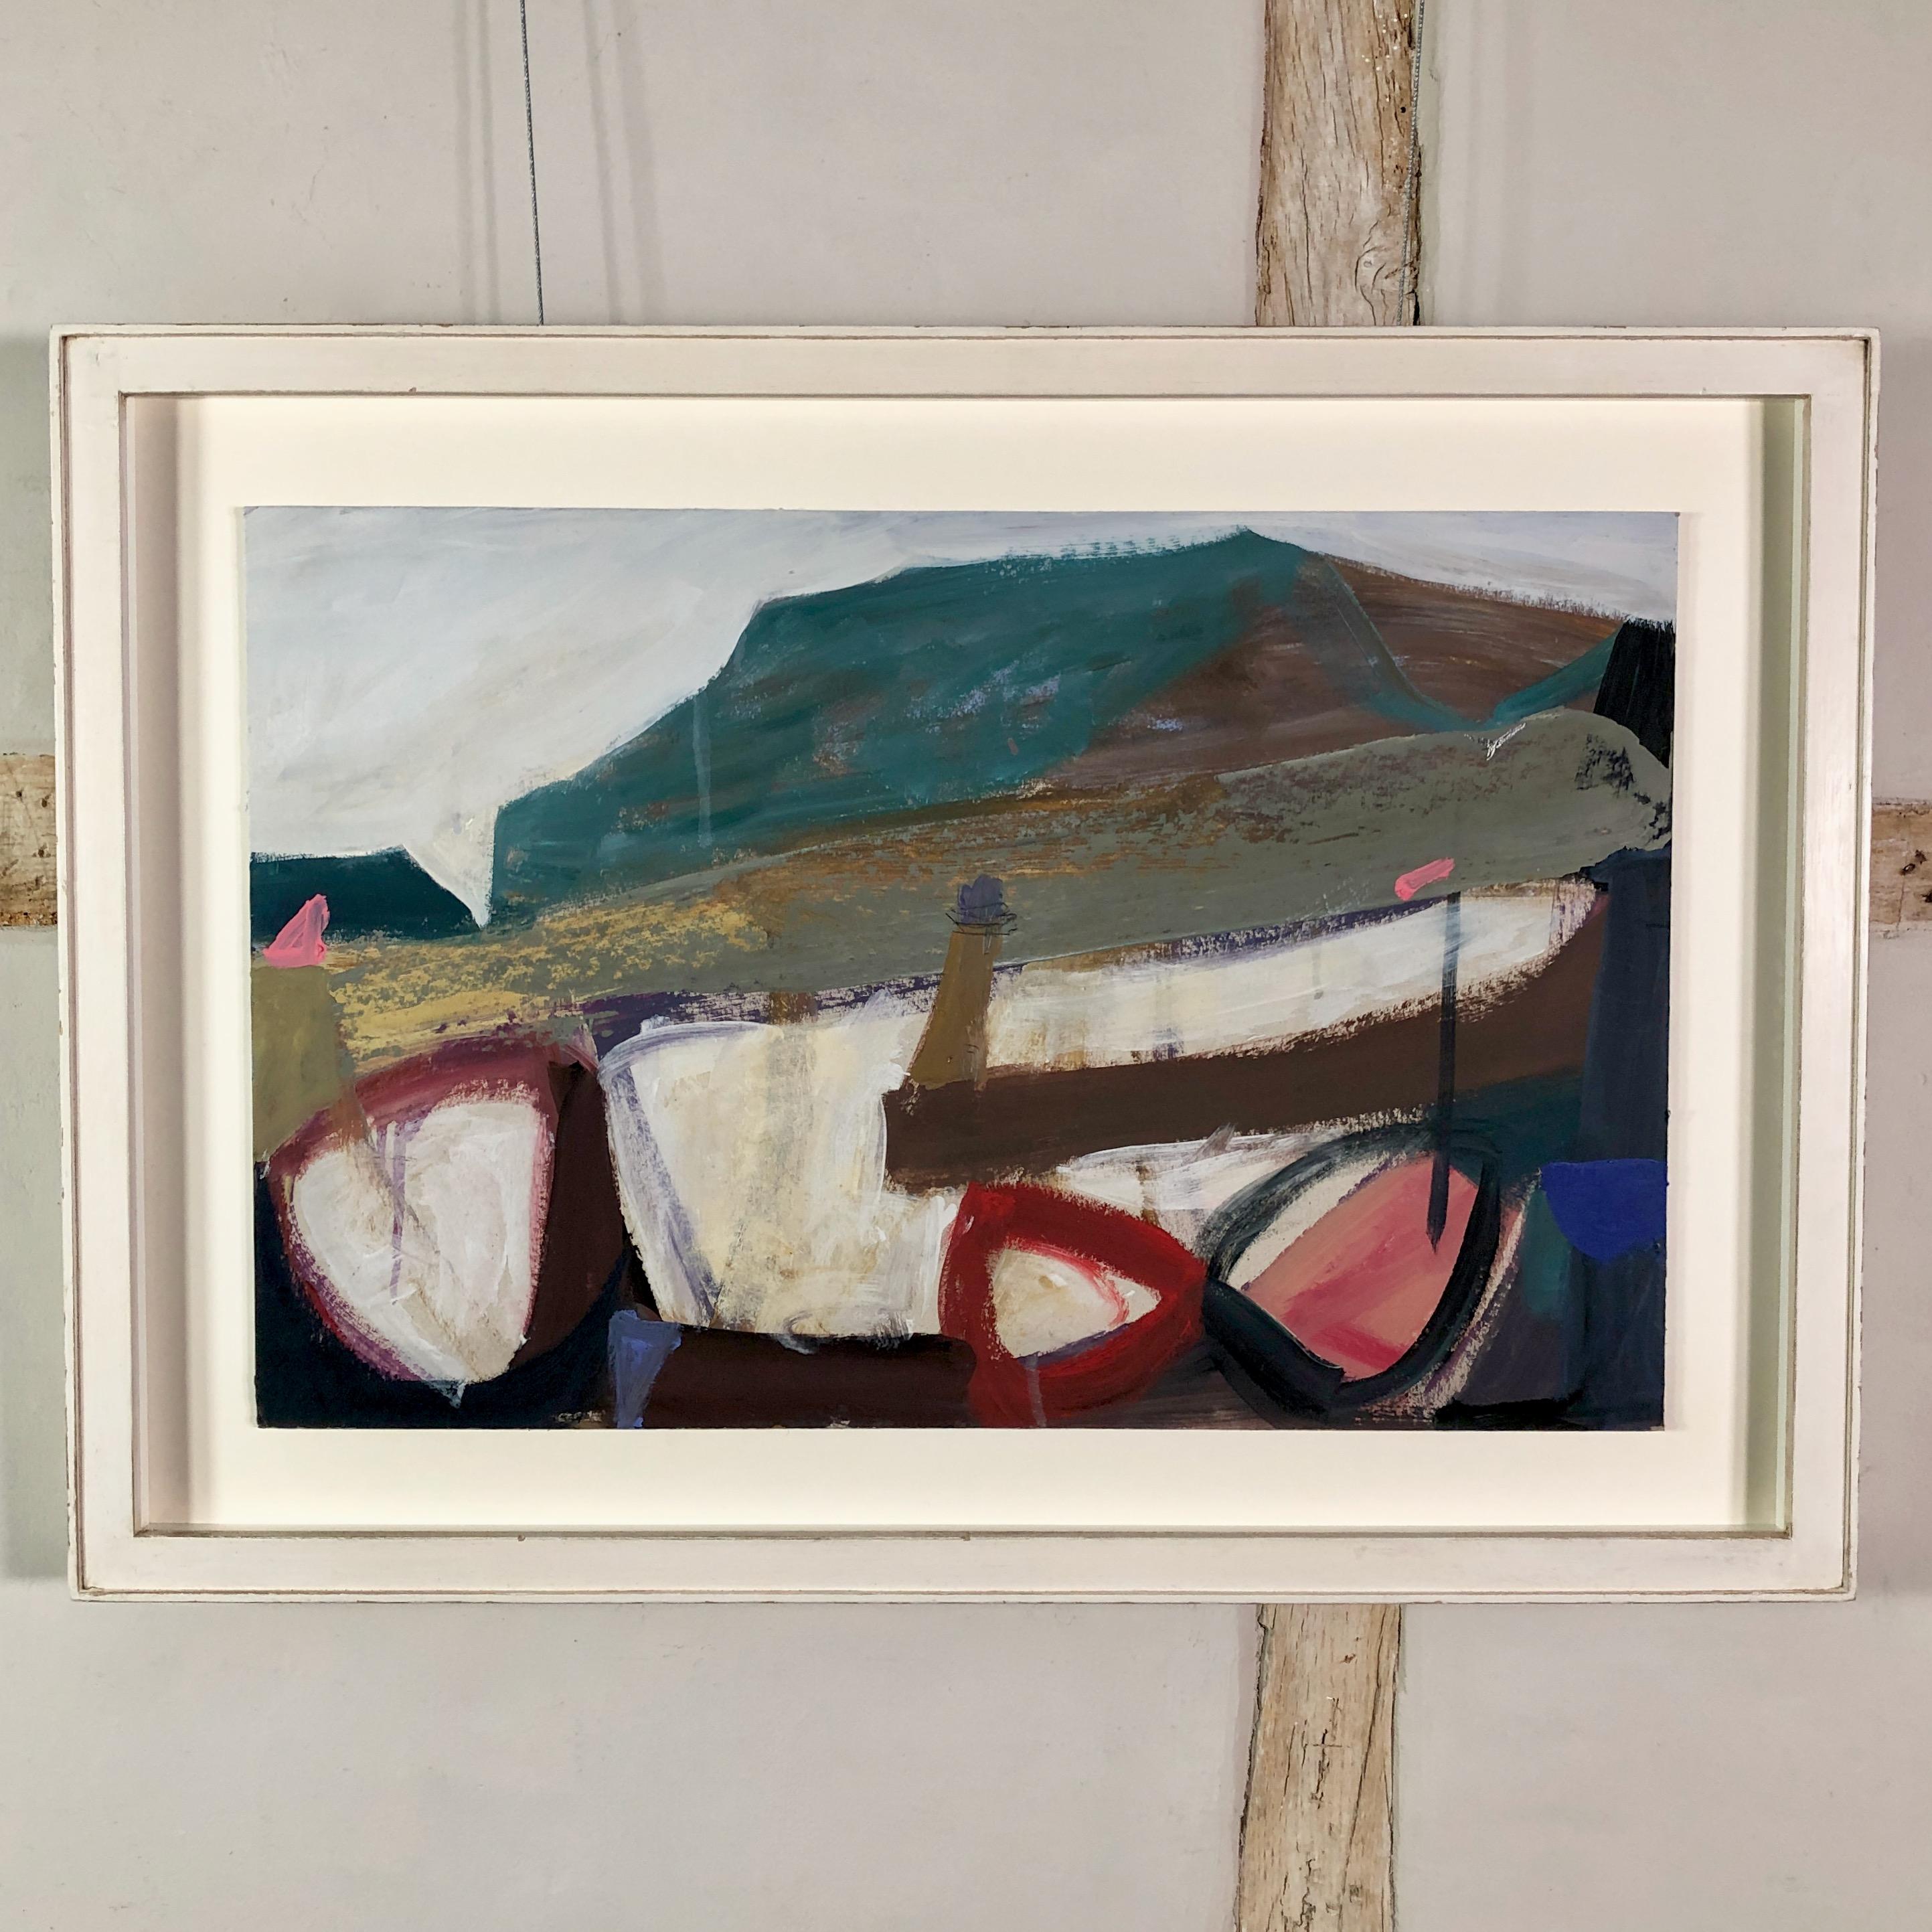 Nicholas Turner is a painter of quiet compositions, beautifully structured and well-painted. Born in London, Turner spent many years in Bristol before moving to Abergavenny, Wales. In 1997 he received his BA (Hons) in Fine Art from UWE Bristol and